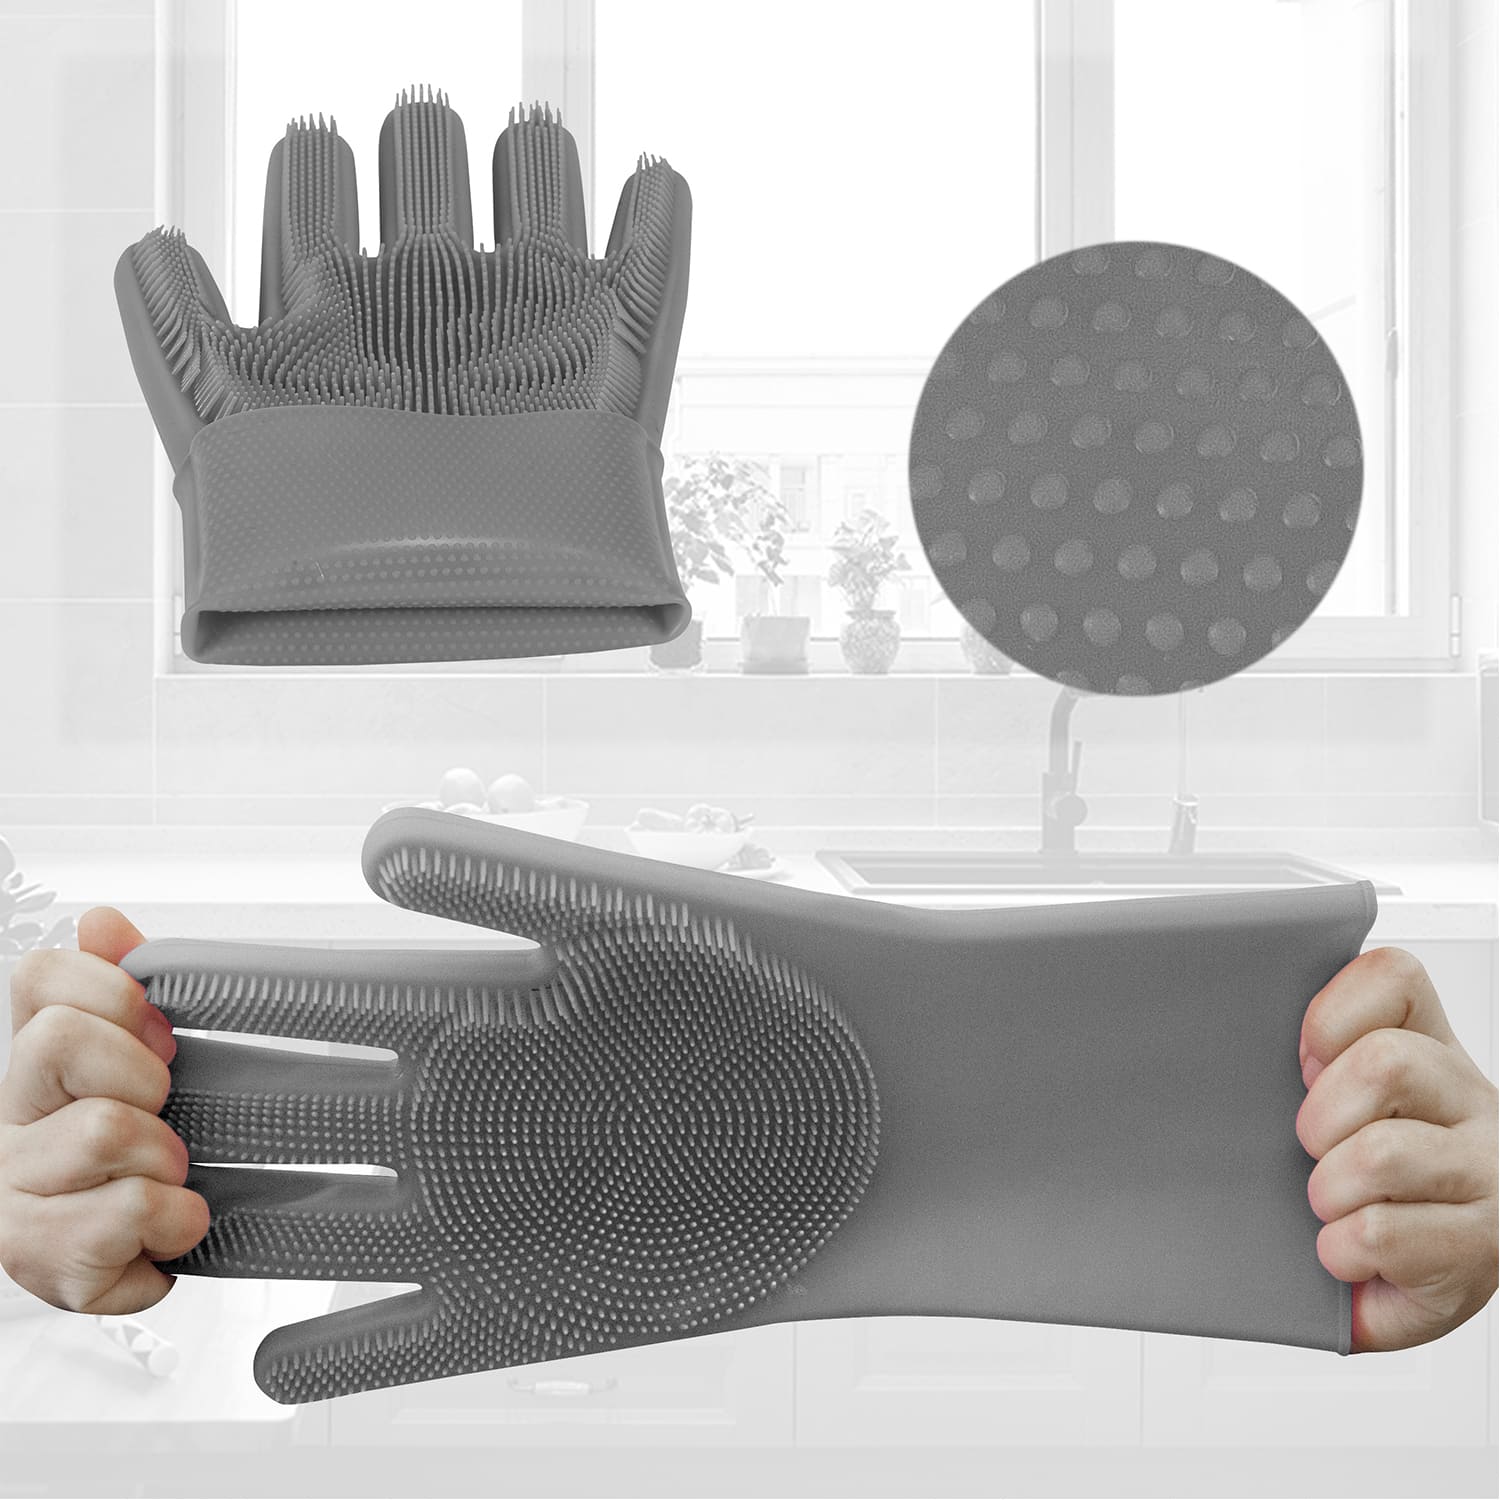 2-Pack Magic Silicone Household Cleaning Gloves